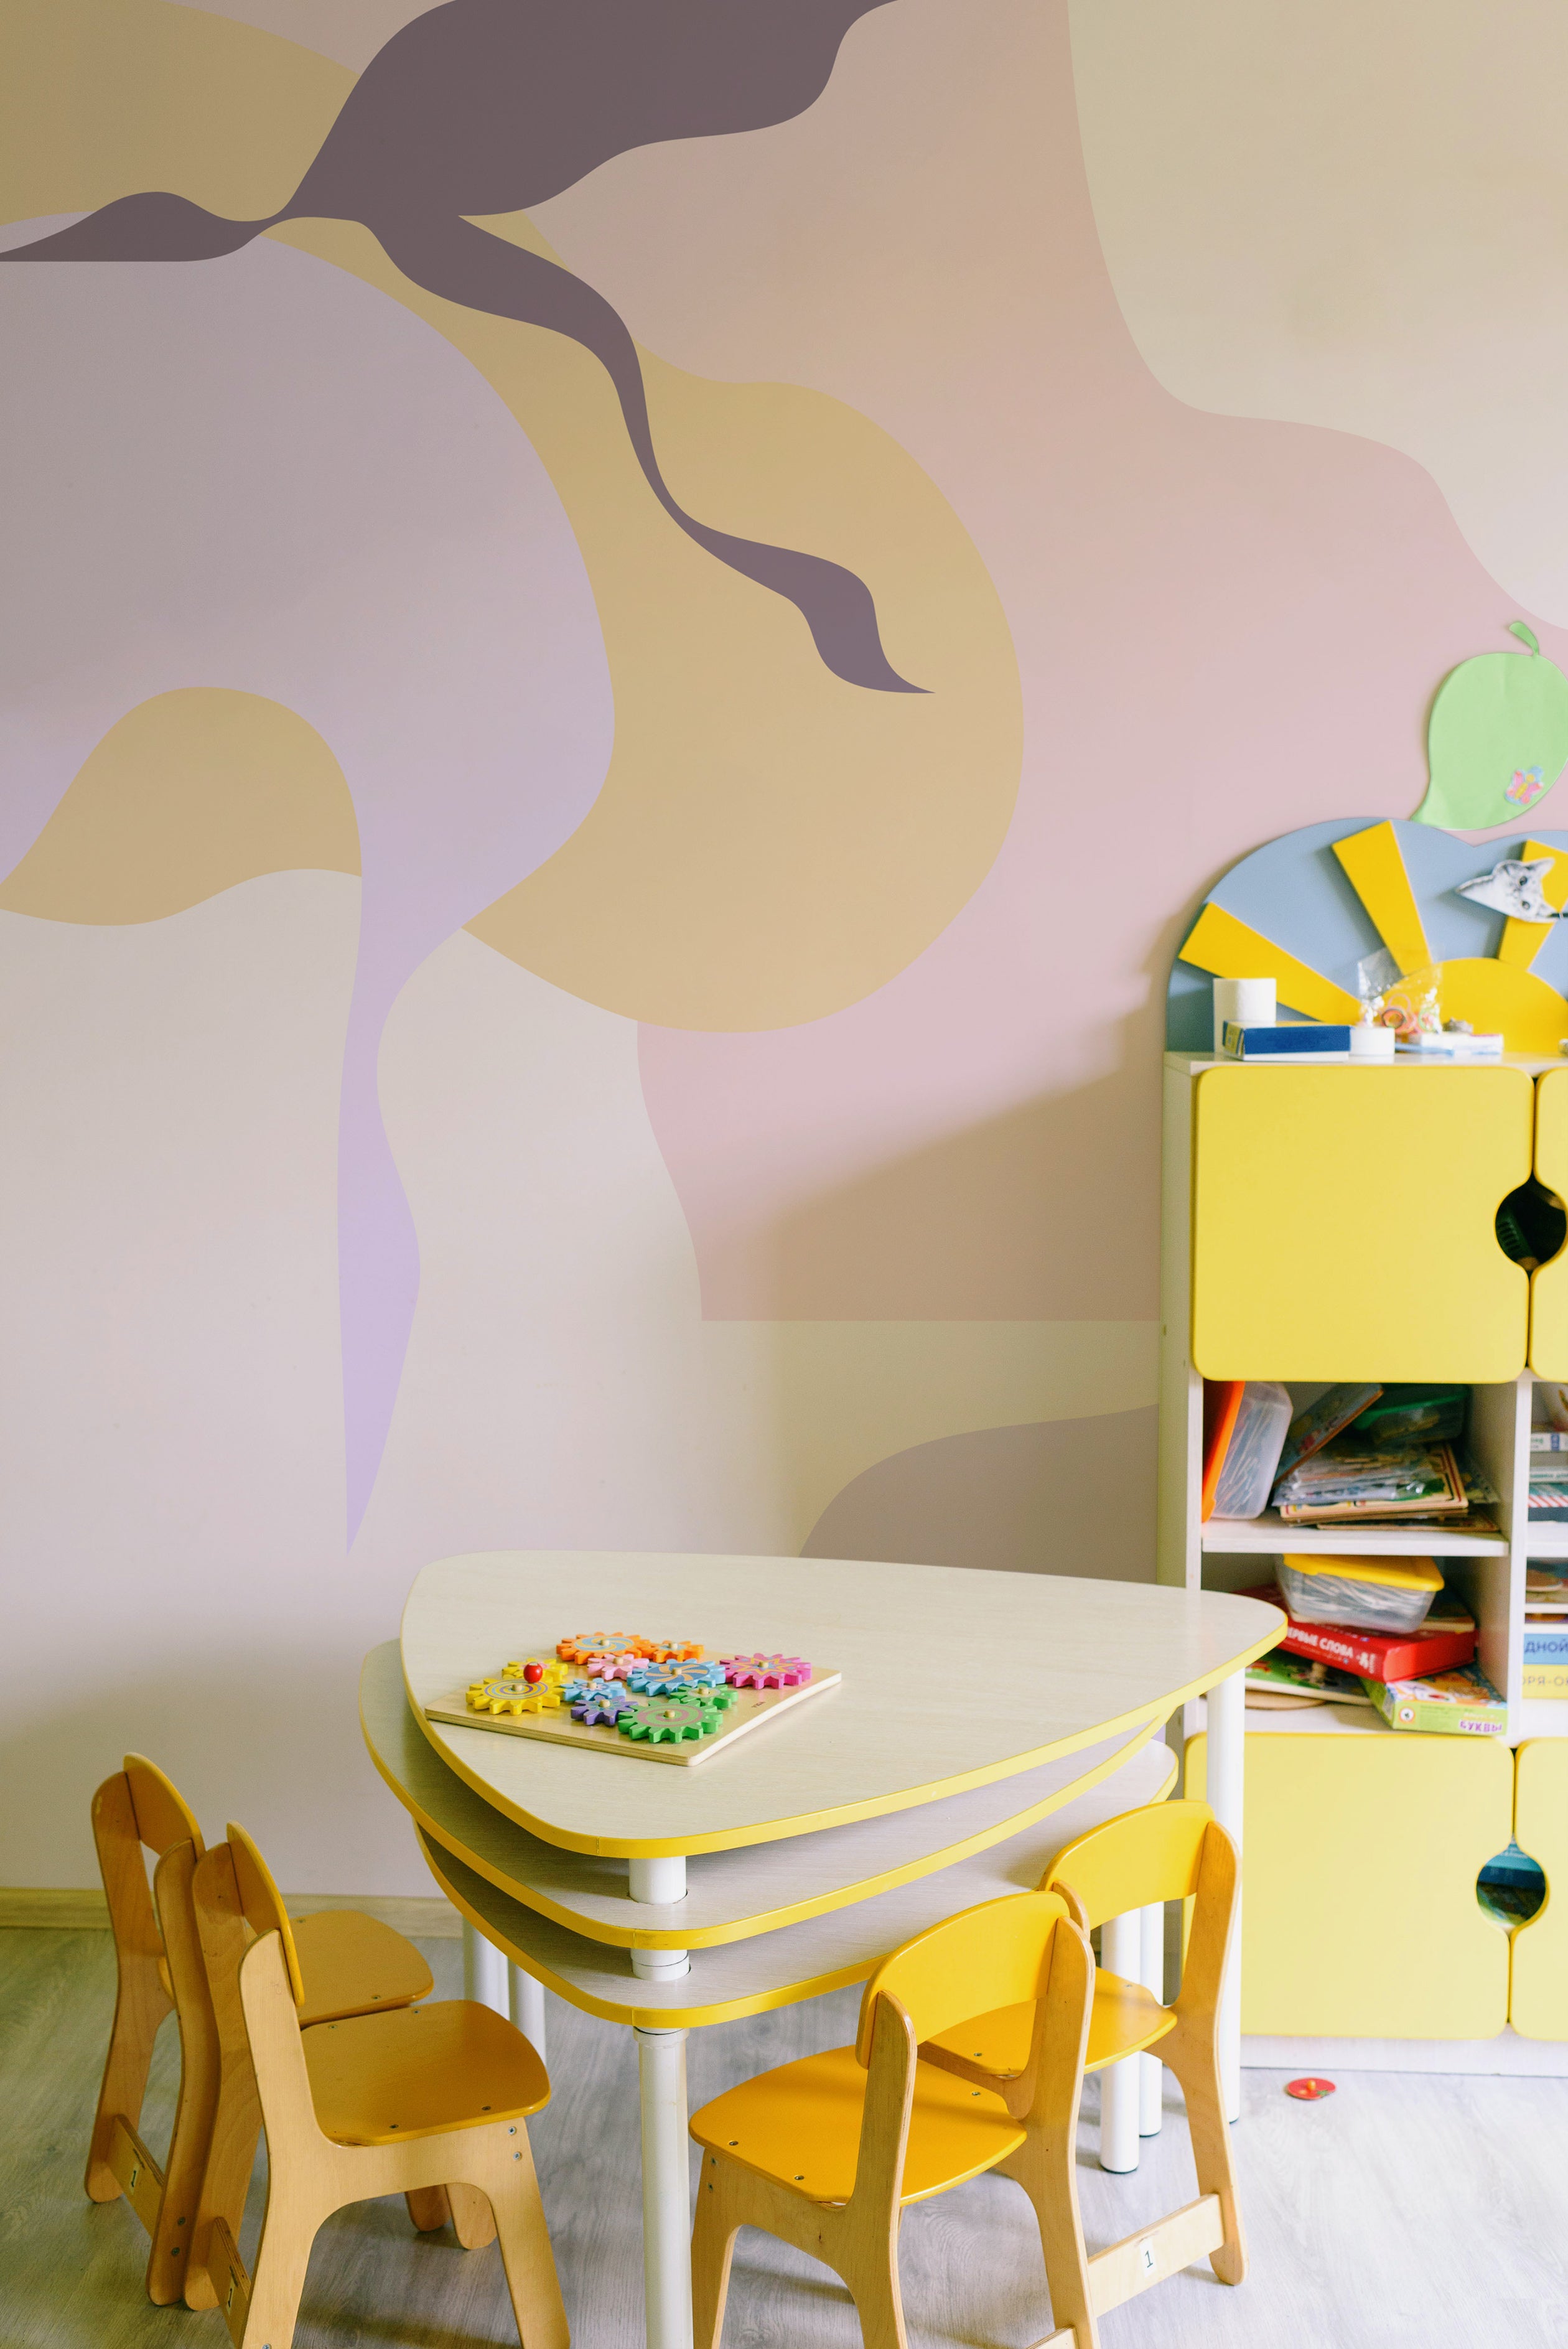 A vibrant and playful children's play area featuring the Contemporary Art - Abstract Wall Mural, with flowing abstract shapes in shades of yellow, purple, and pink. The space is furnished with a yellow child-sized table and chairs, and a yellow storage unit, creating a stimulating environment for creativity.